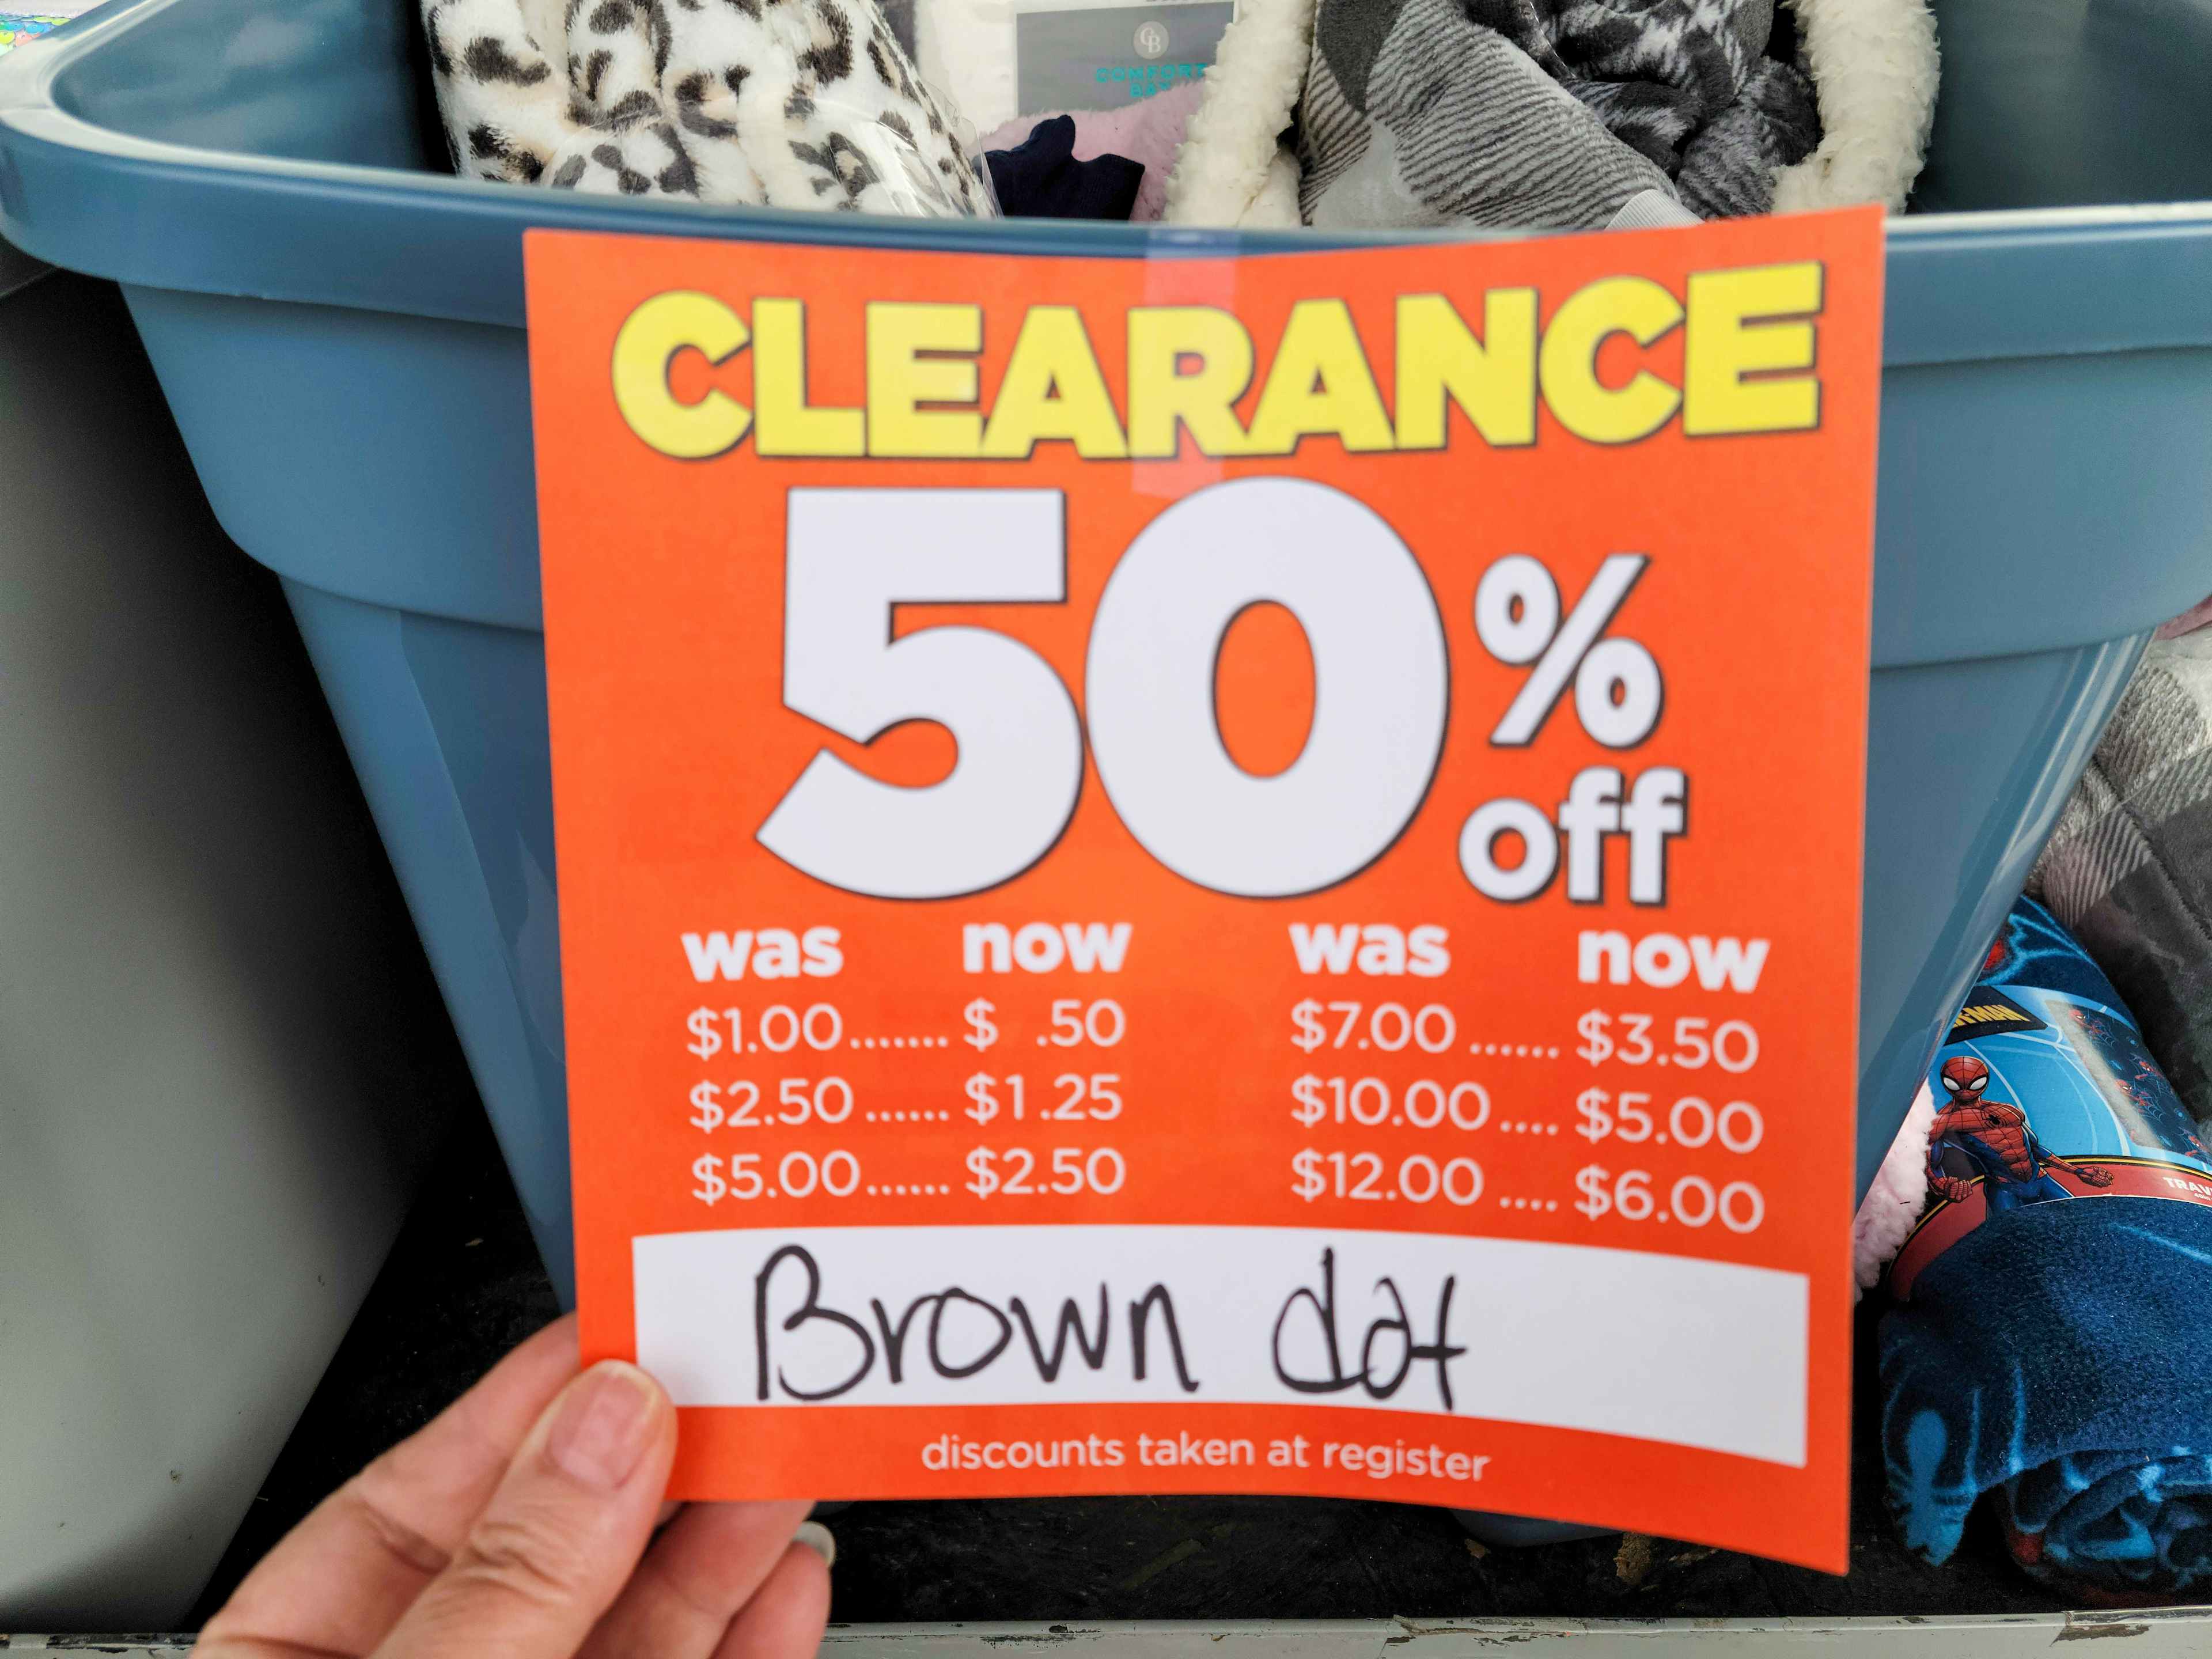 dollar-general-clearance-event-may-10-24-4-sv